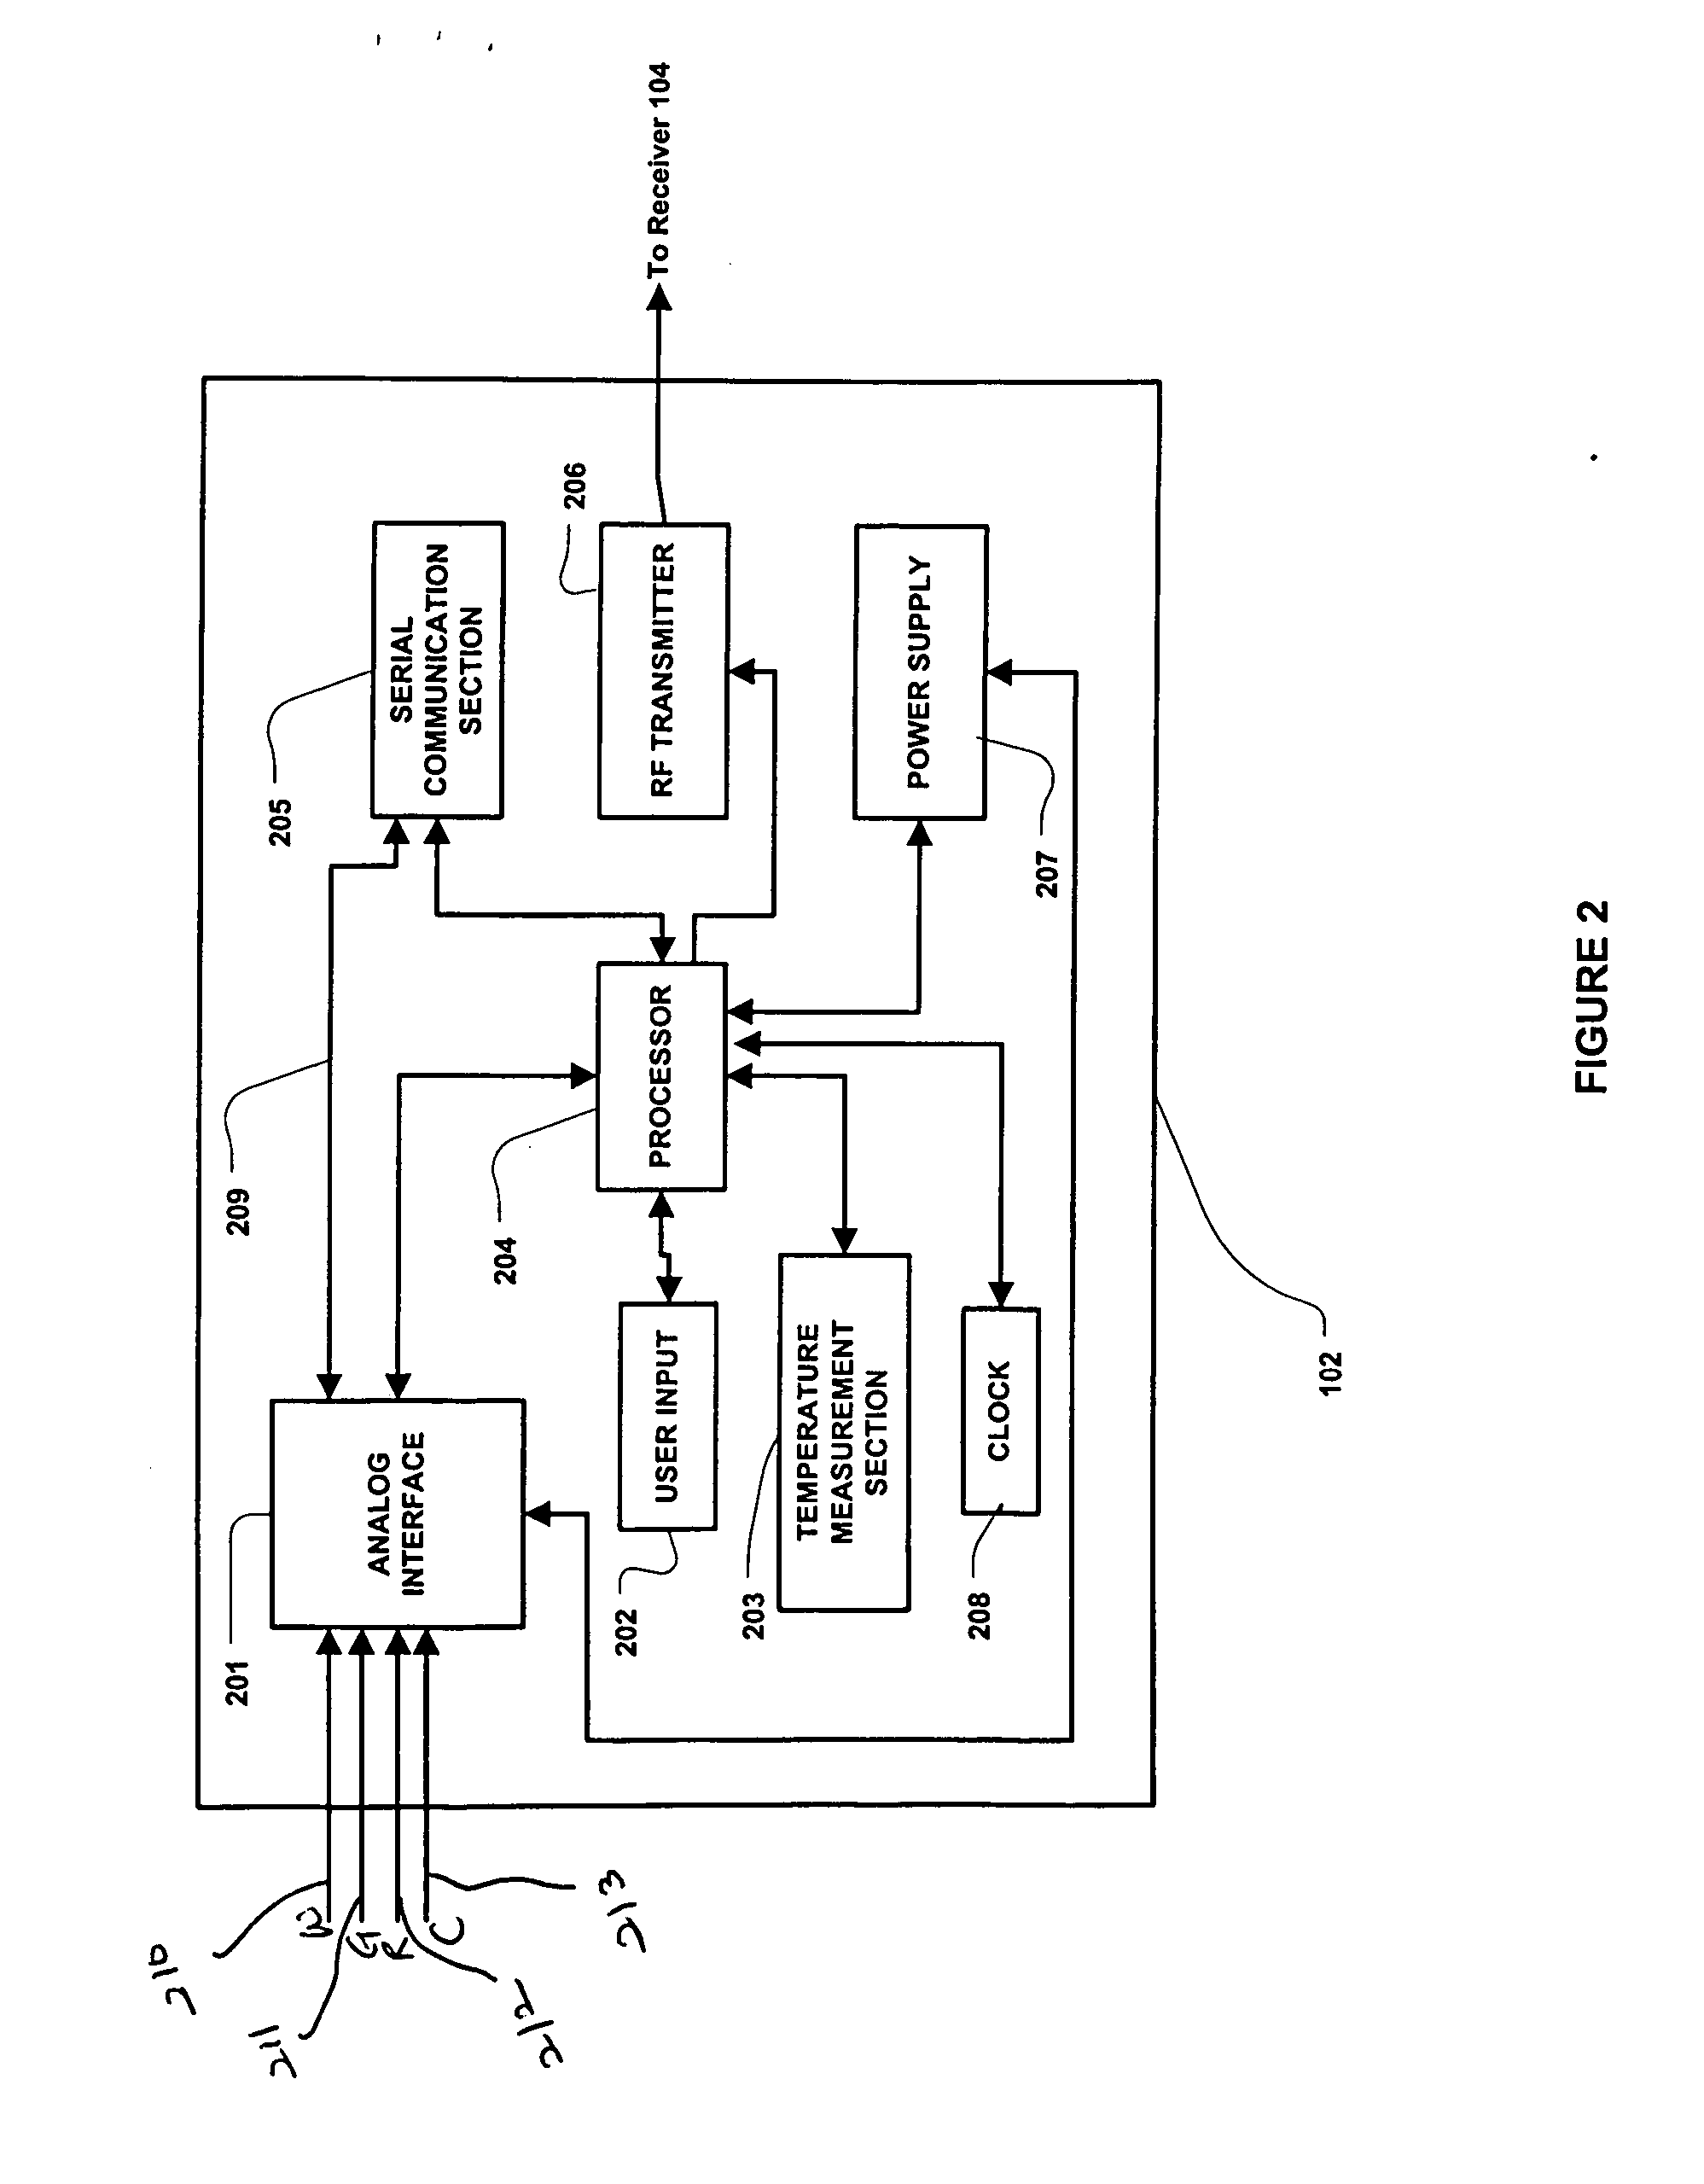 Method and apparatus for providing rechargeable power in data monitoring and management systems